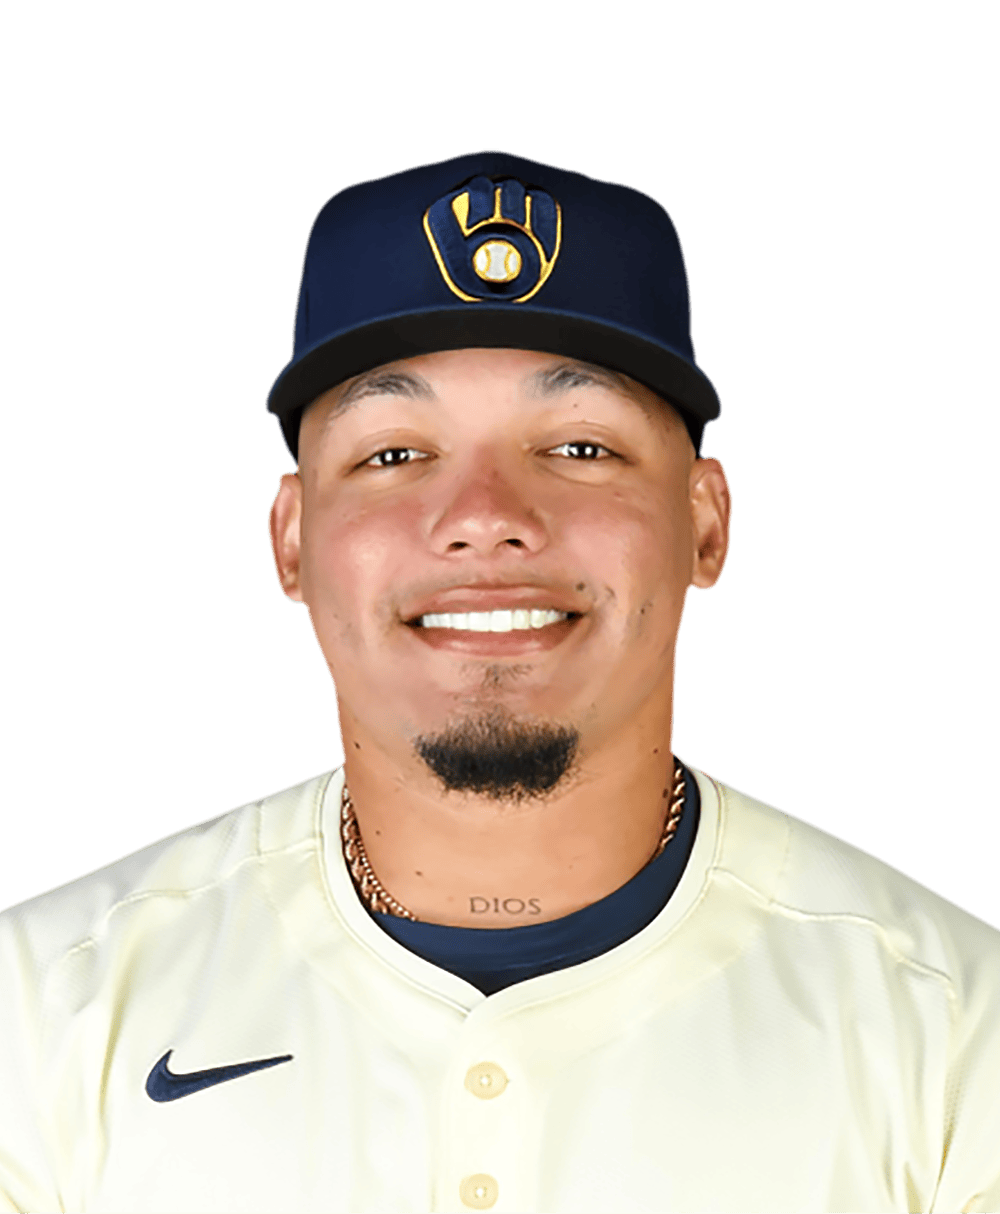 William Contreras hits 2-run double as Brewers beat Padres 5-4